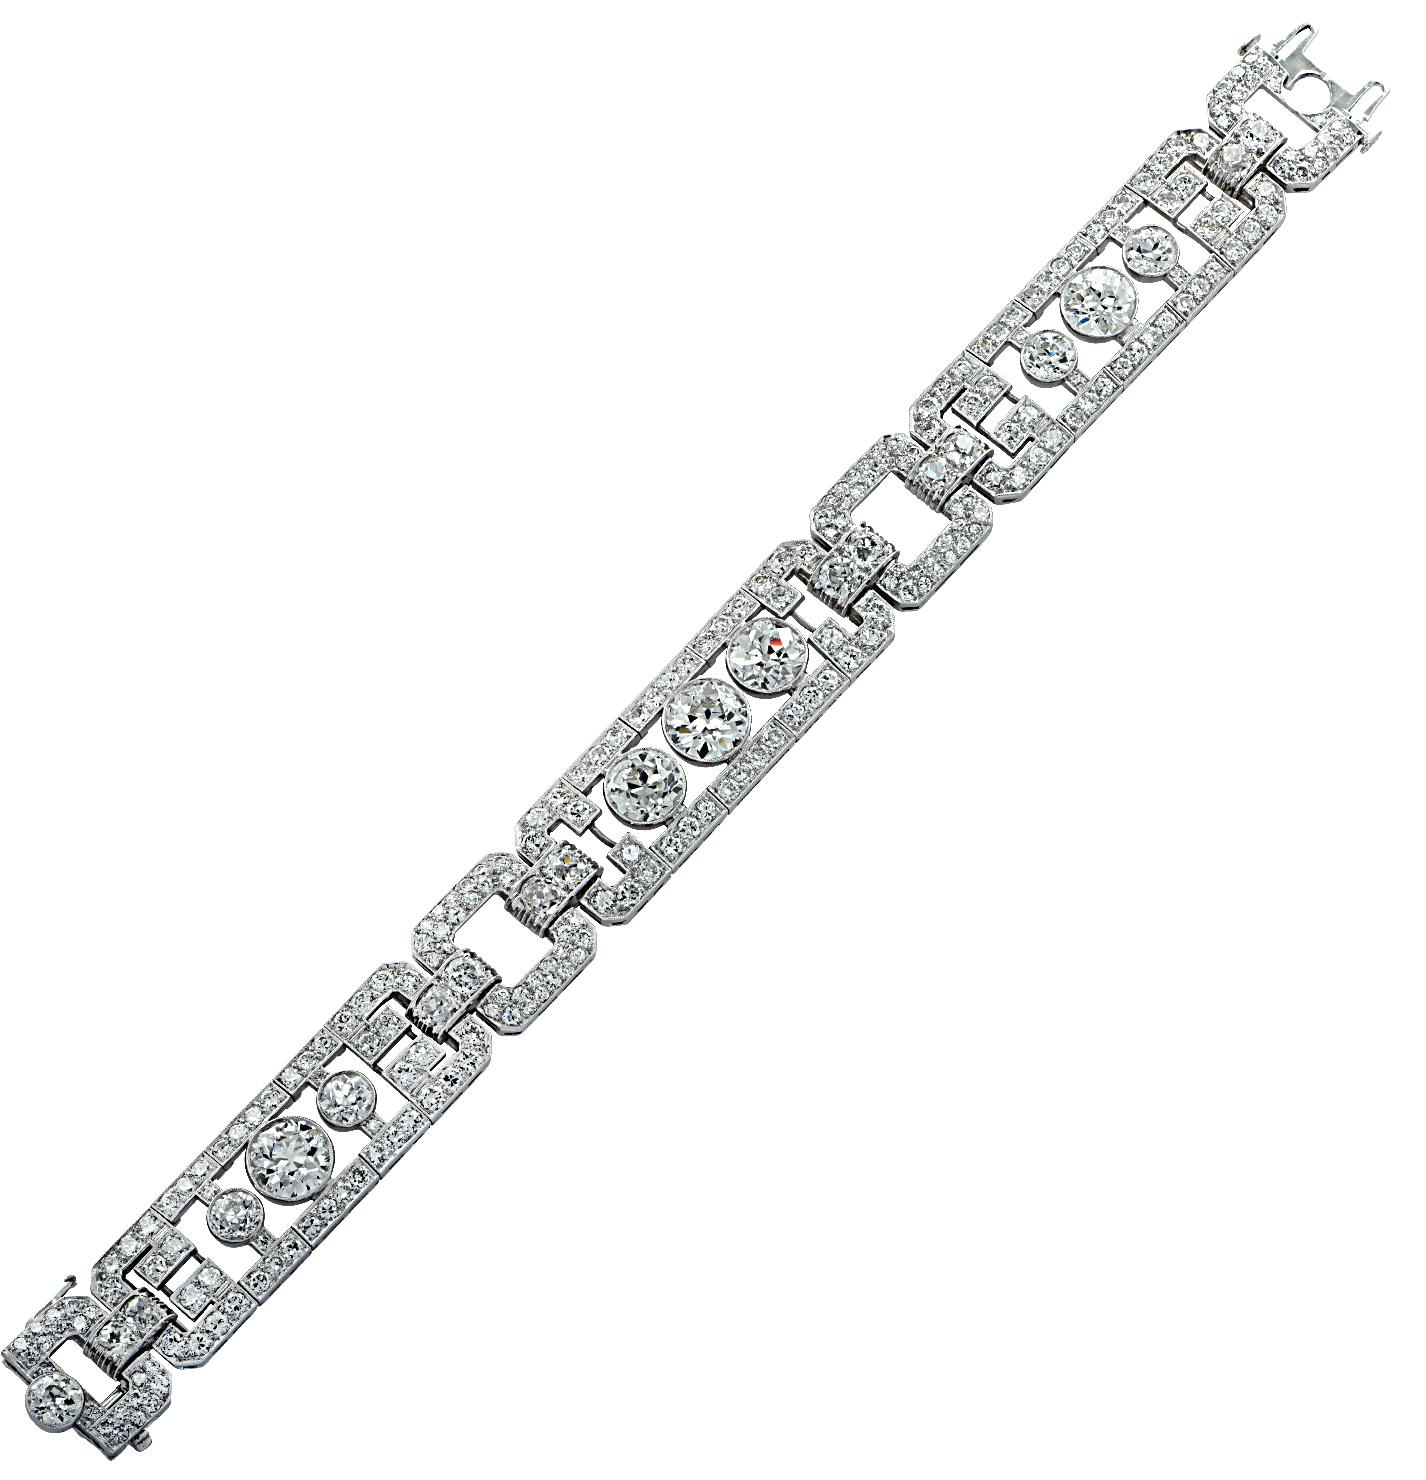 Spectacular Art Deco bracelet crafted in platinum, featuring 228 Old European Cut Diamonds weighing approximately 16.32 carats total, G-J color, VS-SI clarity. The bracelet has 3 articulated diamond encrusted openwork plates, each showcasing three